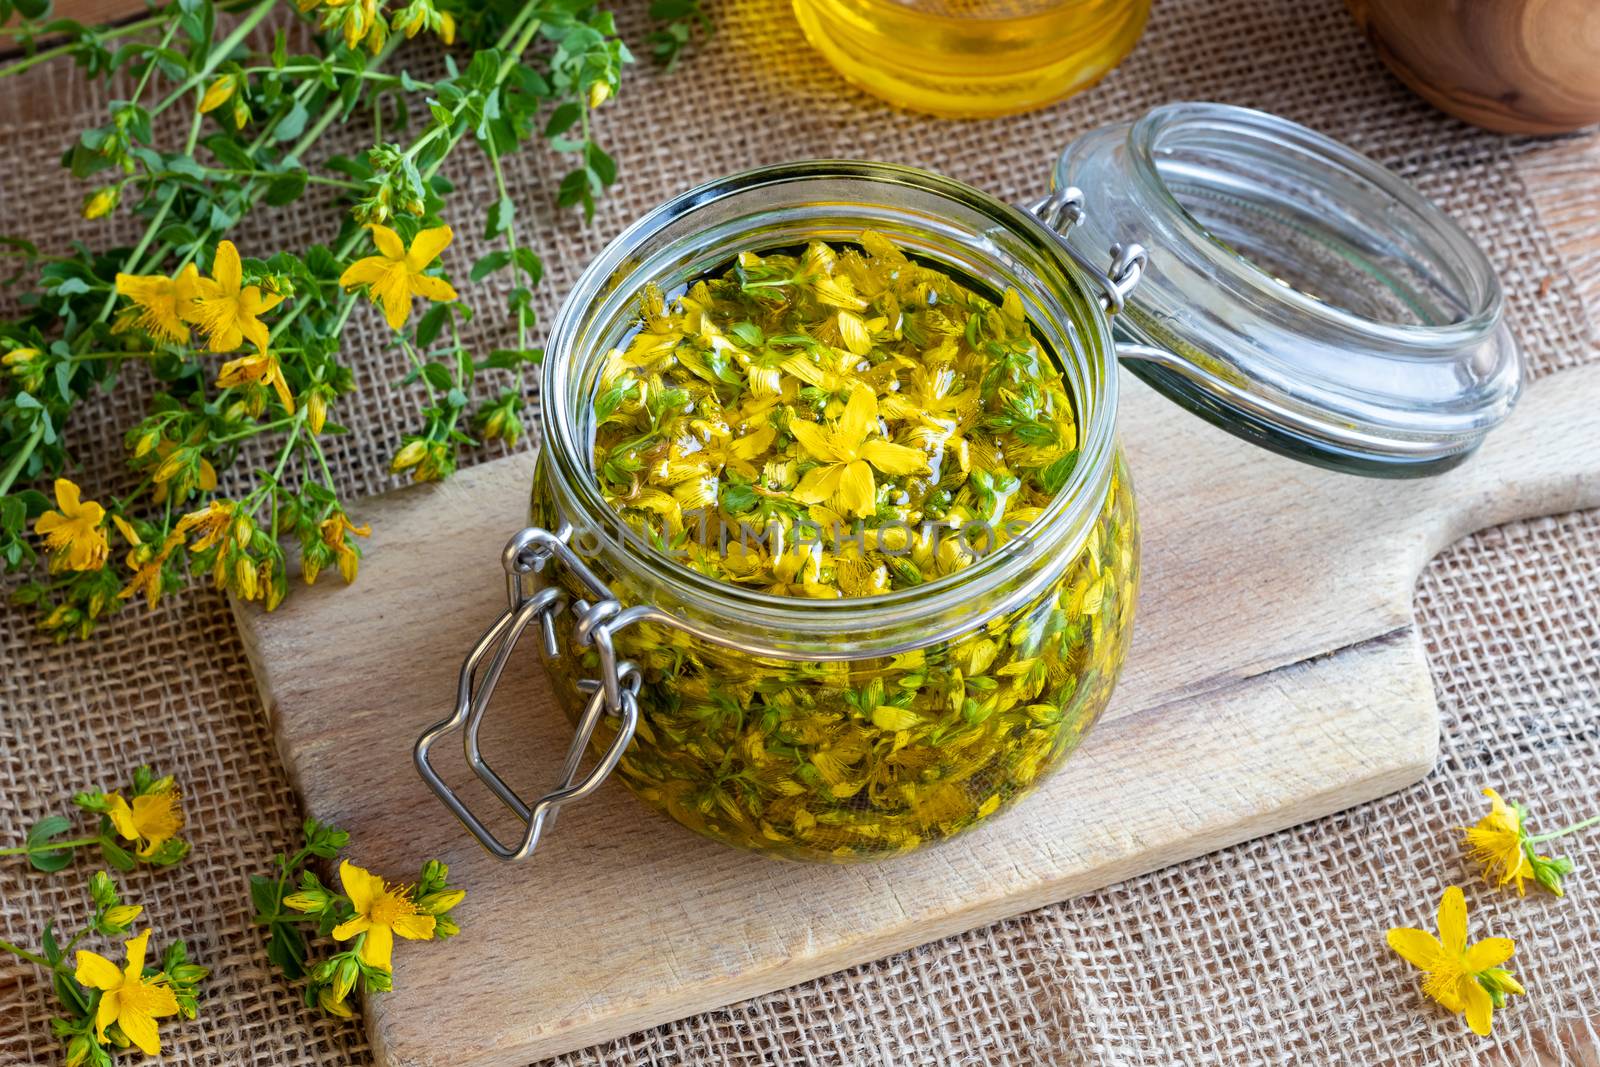 St. John's wort flowers macerating in olive oil in a glass jar